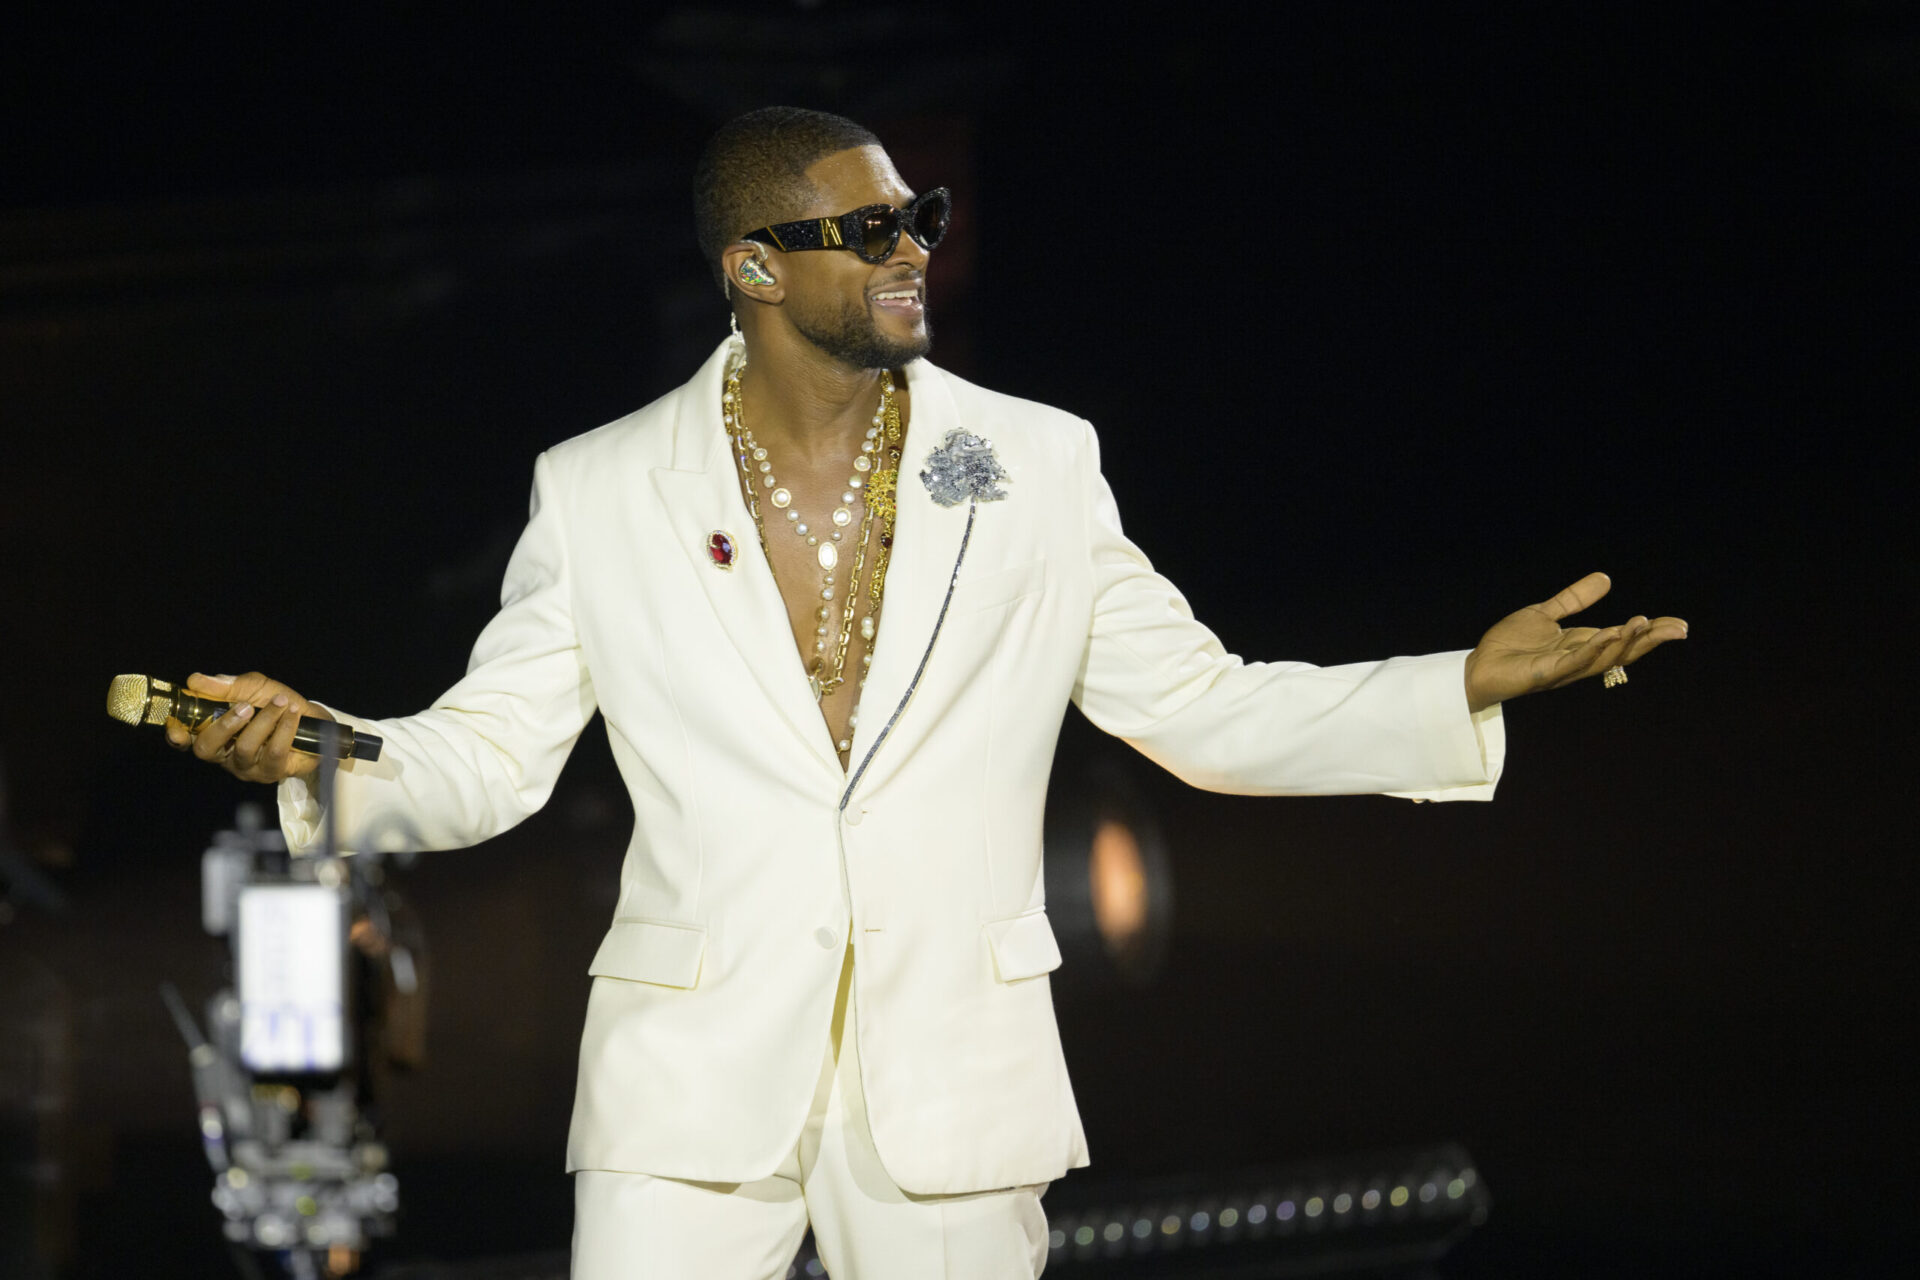 Usher Teams Up With Skims for Steamy Album Promo